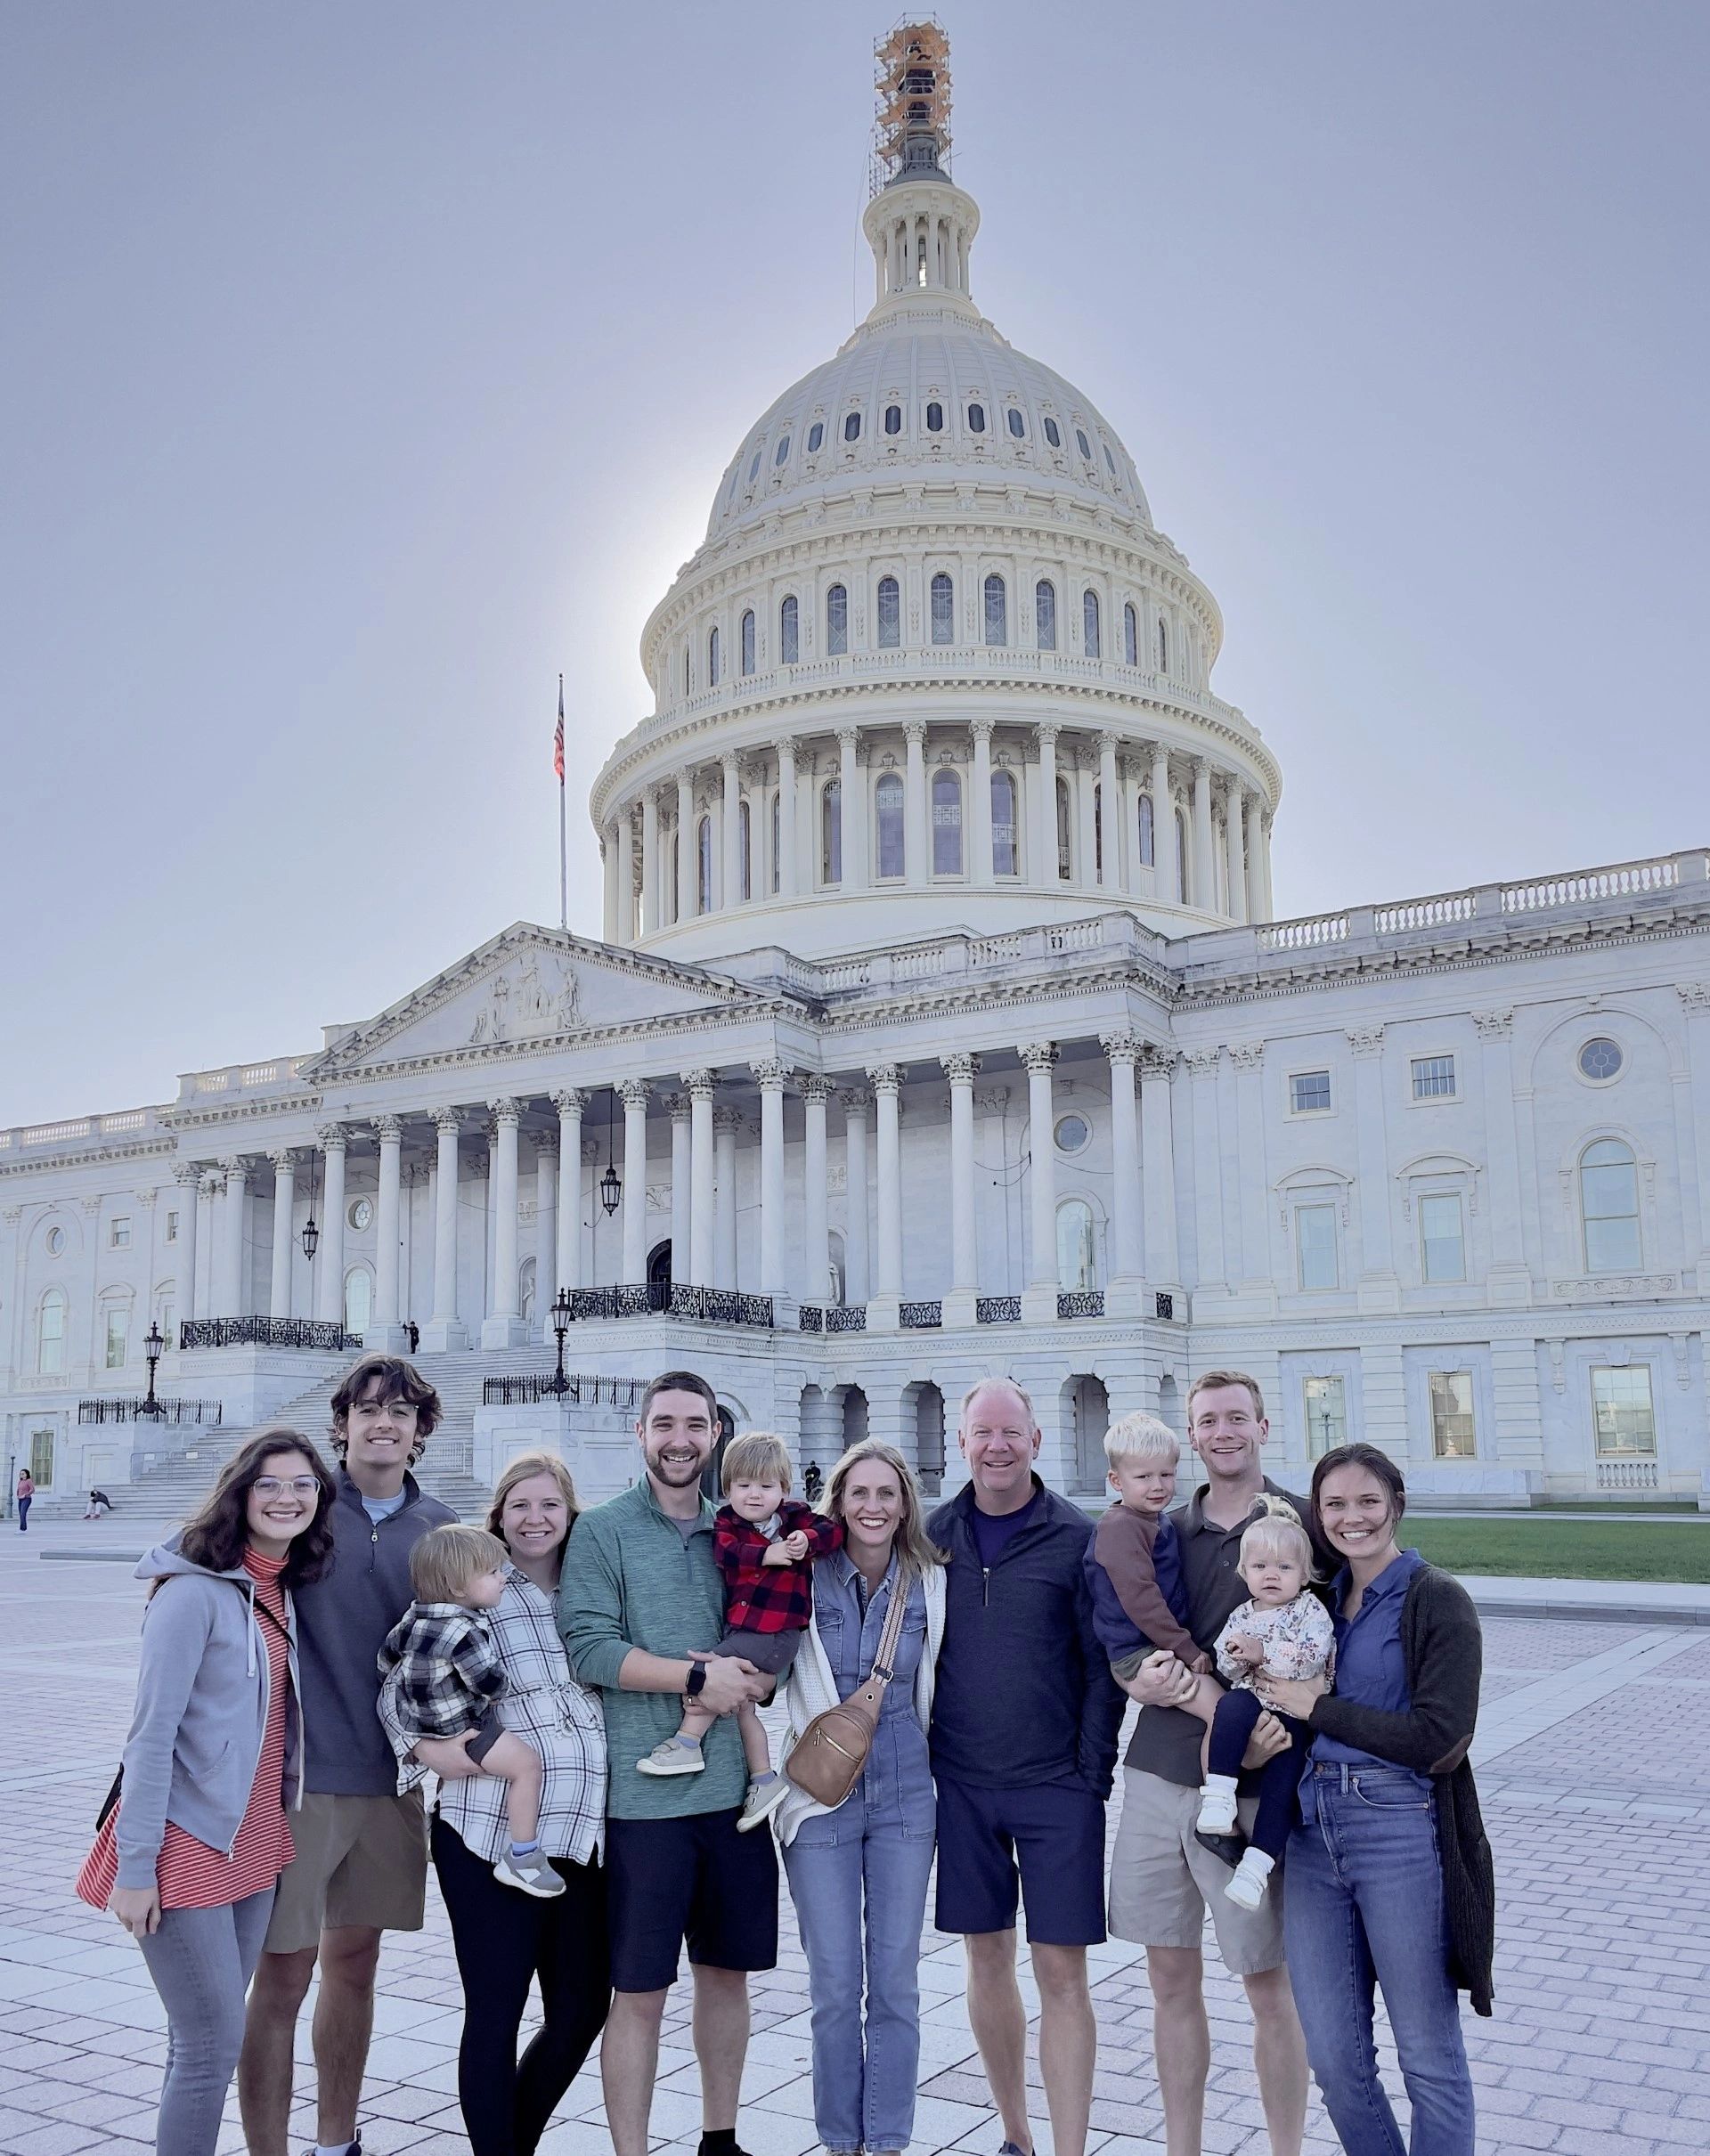 Jamie and his family at the United States Capital building